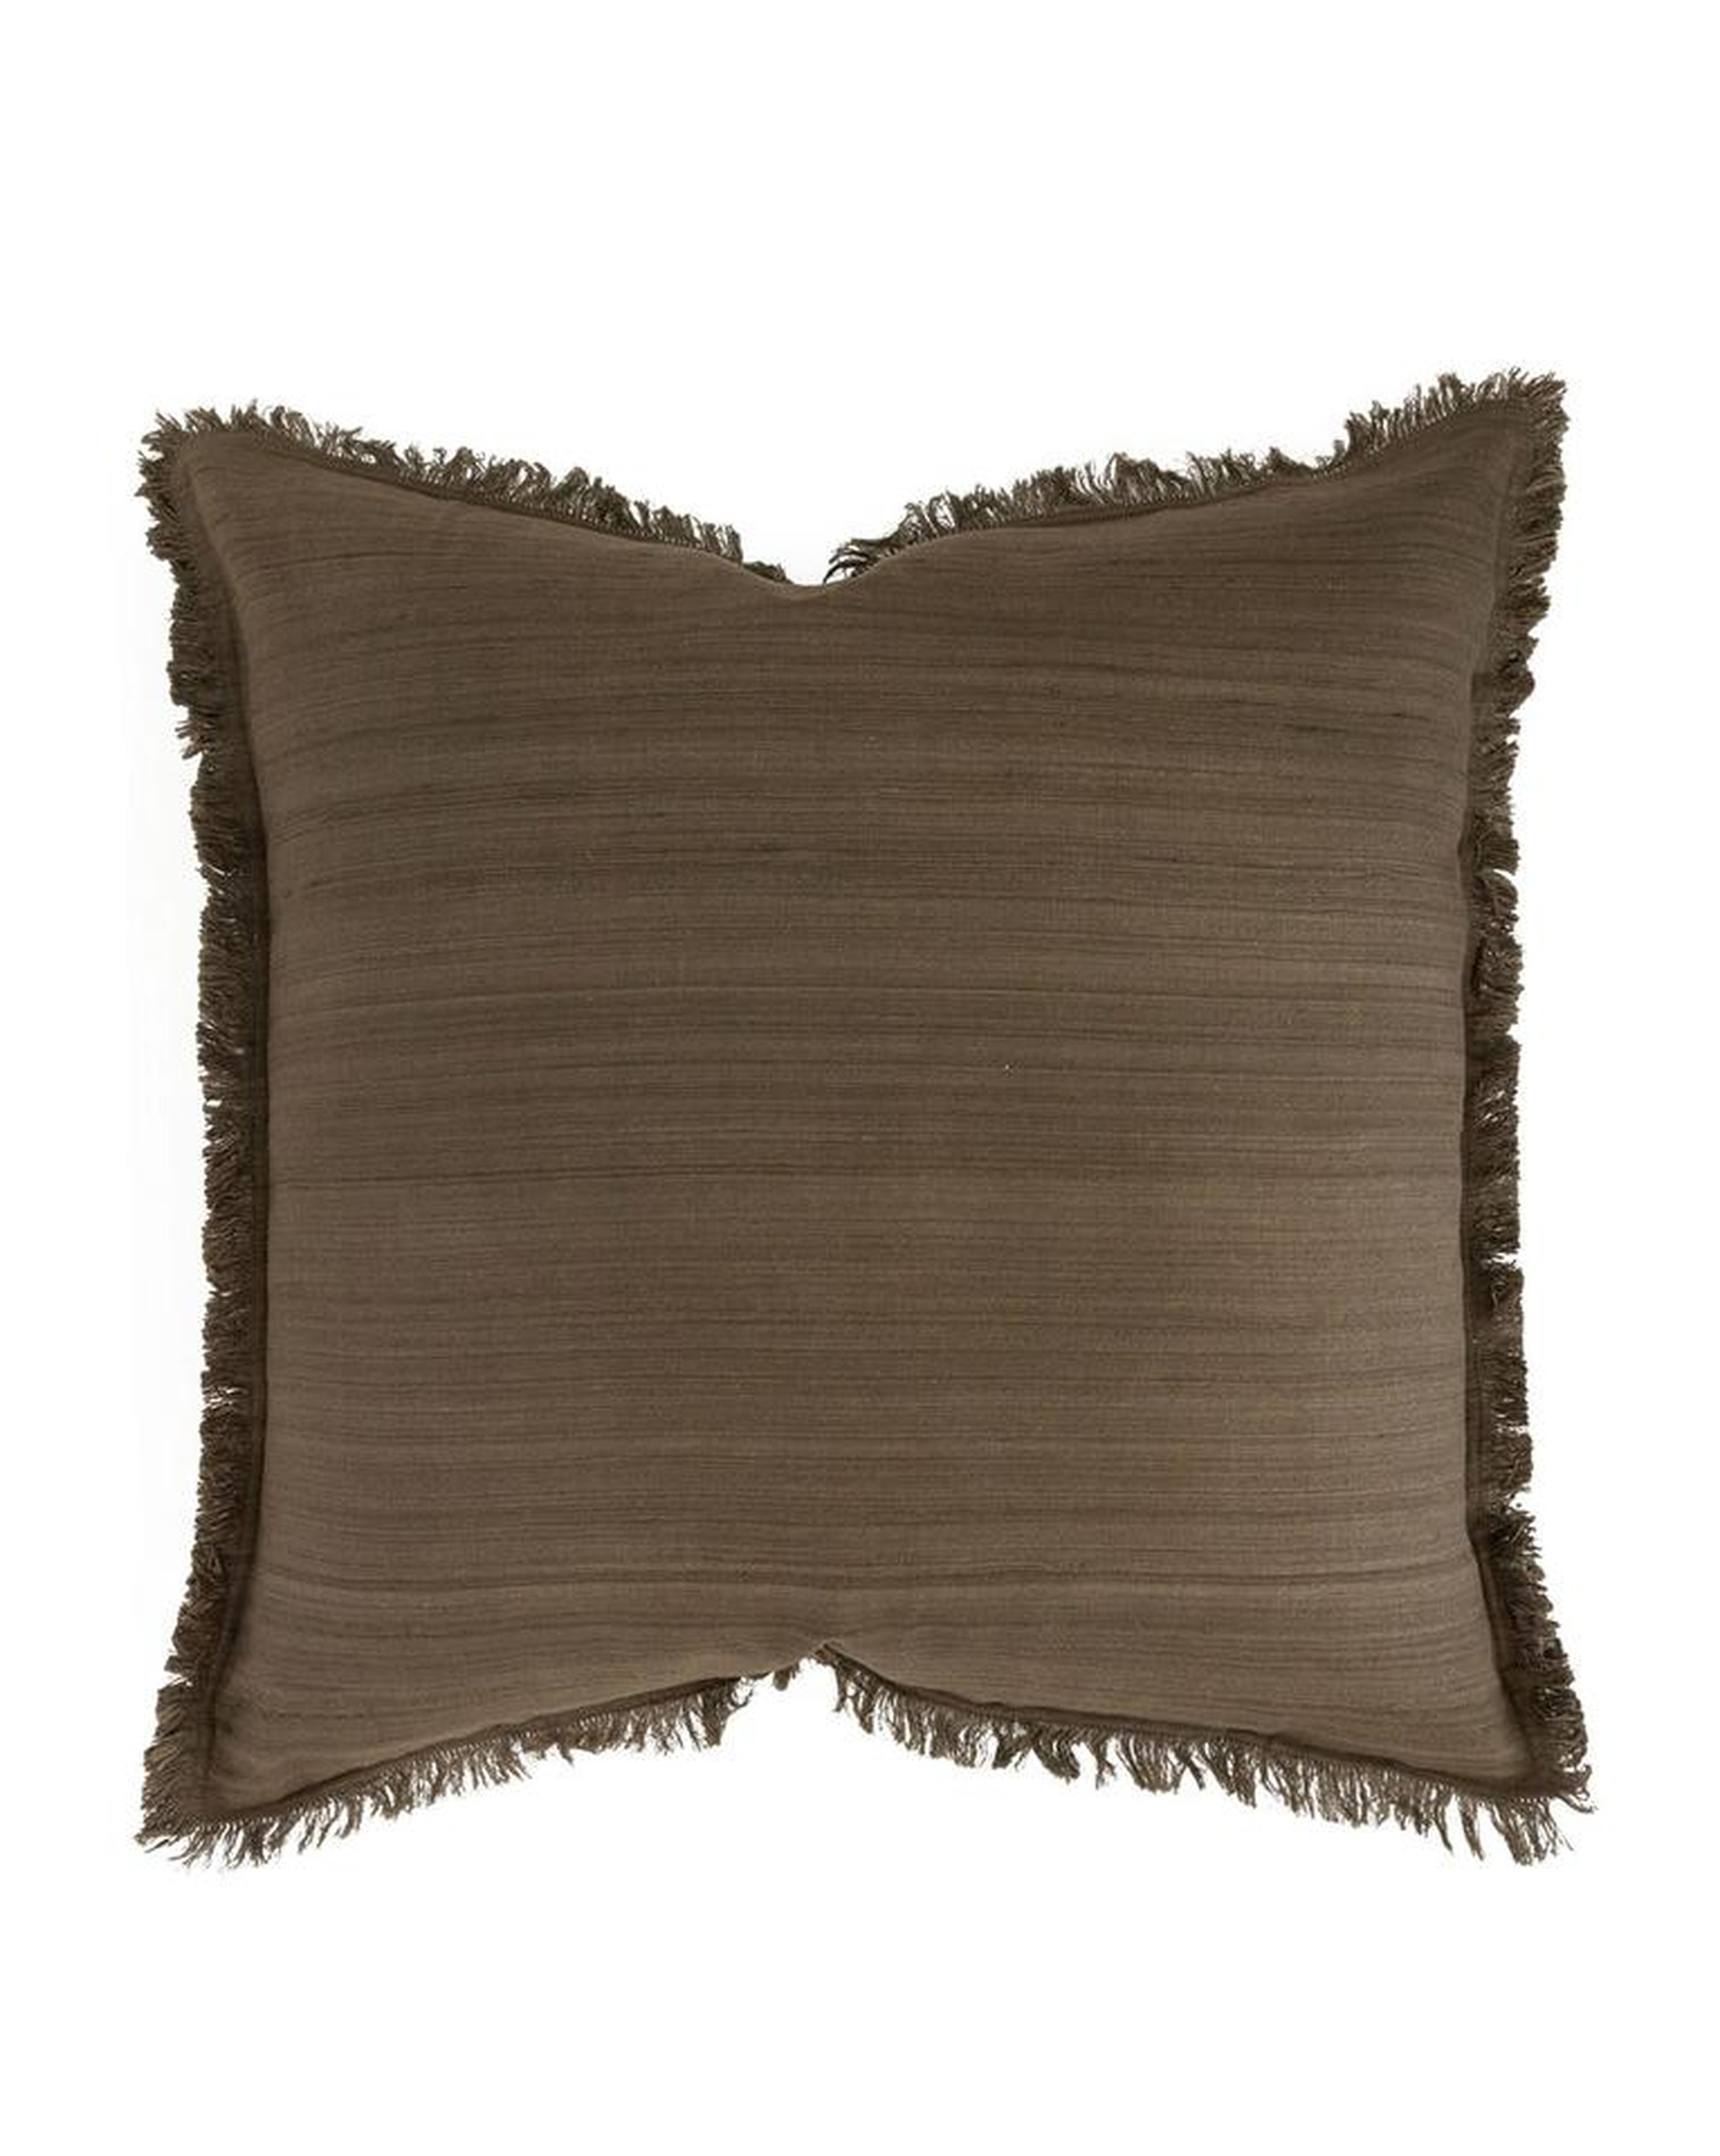 ABBEY SILK FRINGE PILLOW COVER - McGee & Co.